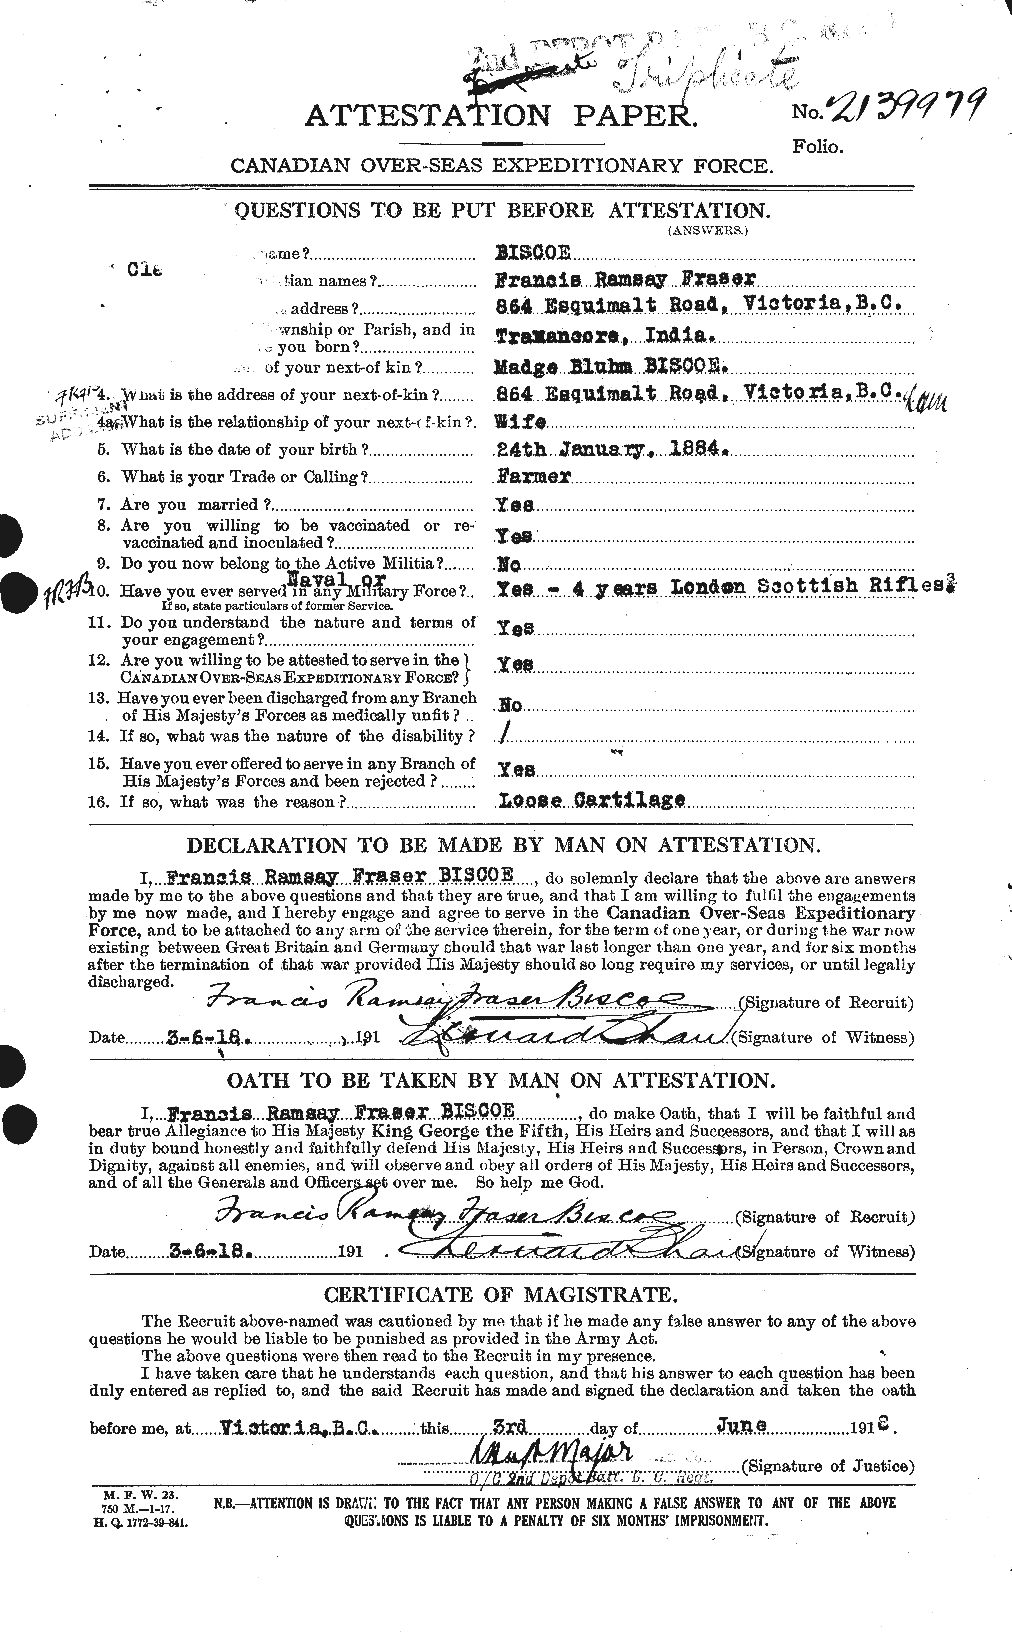 Personnel Records of the First World War - CEF 244130a